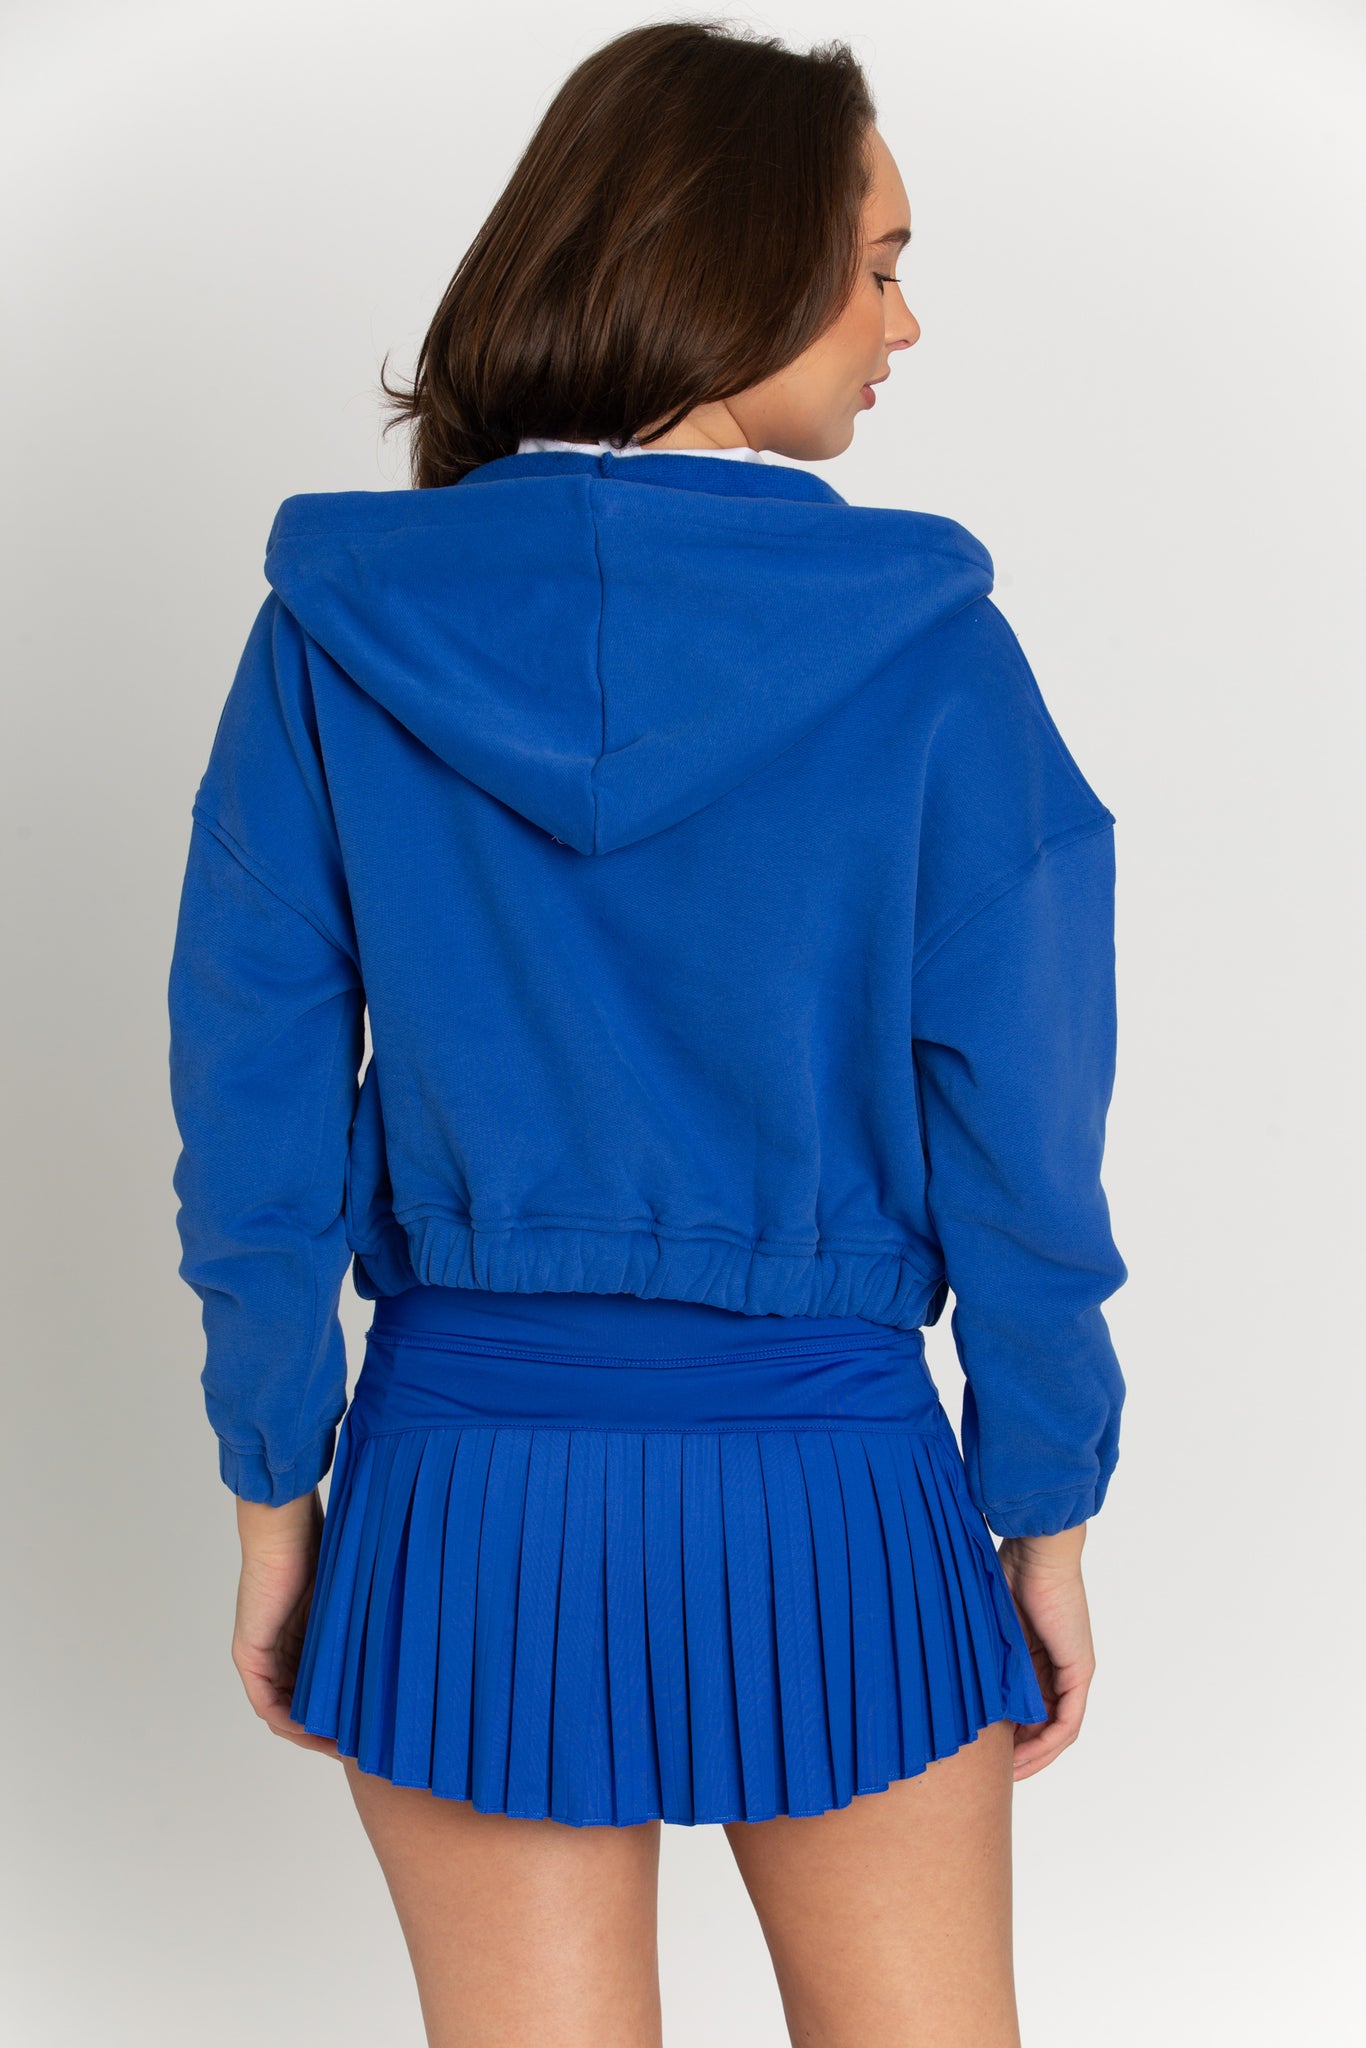 A cobalt blue hoodie jacket made of thick cotton blend with fleece lining. It features two front pockets, a drawstring hood and elastic waist/wrist bands. Stylish and versatile - perfect for any occasion.